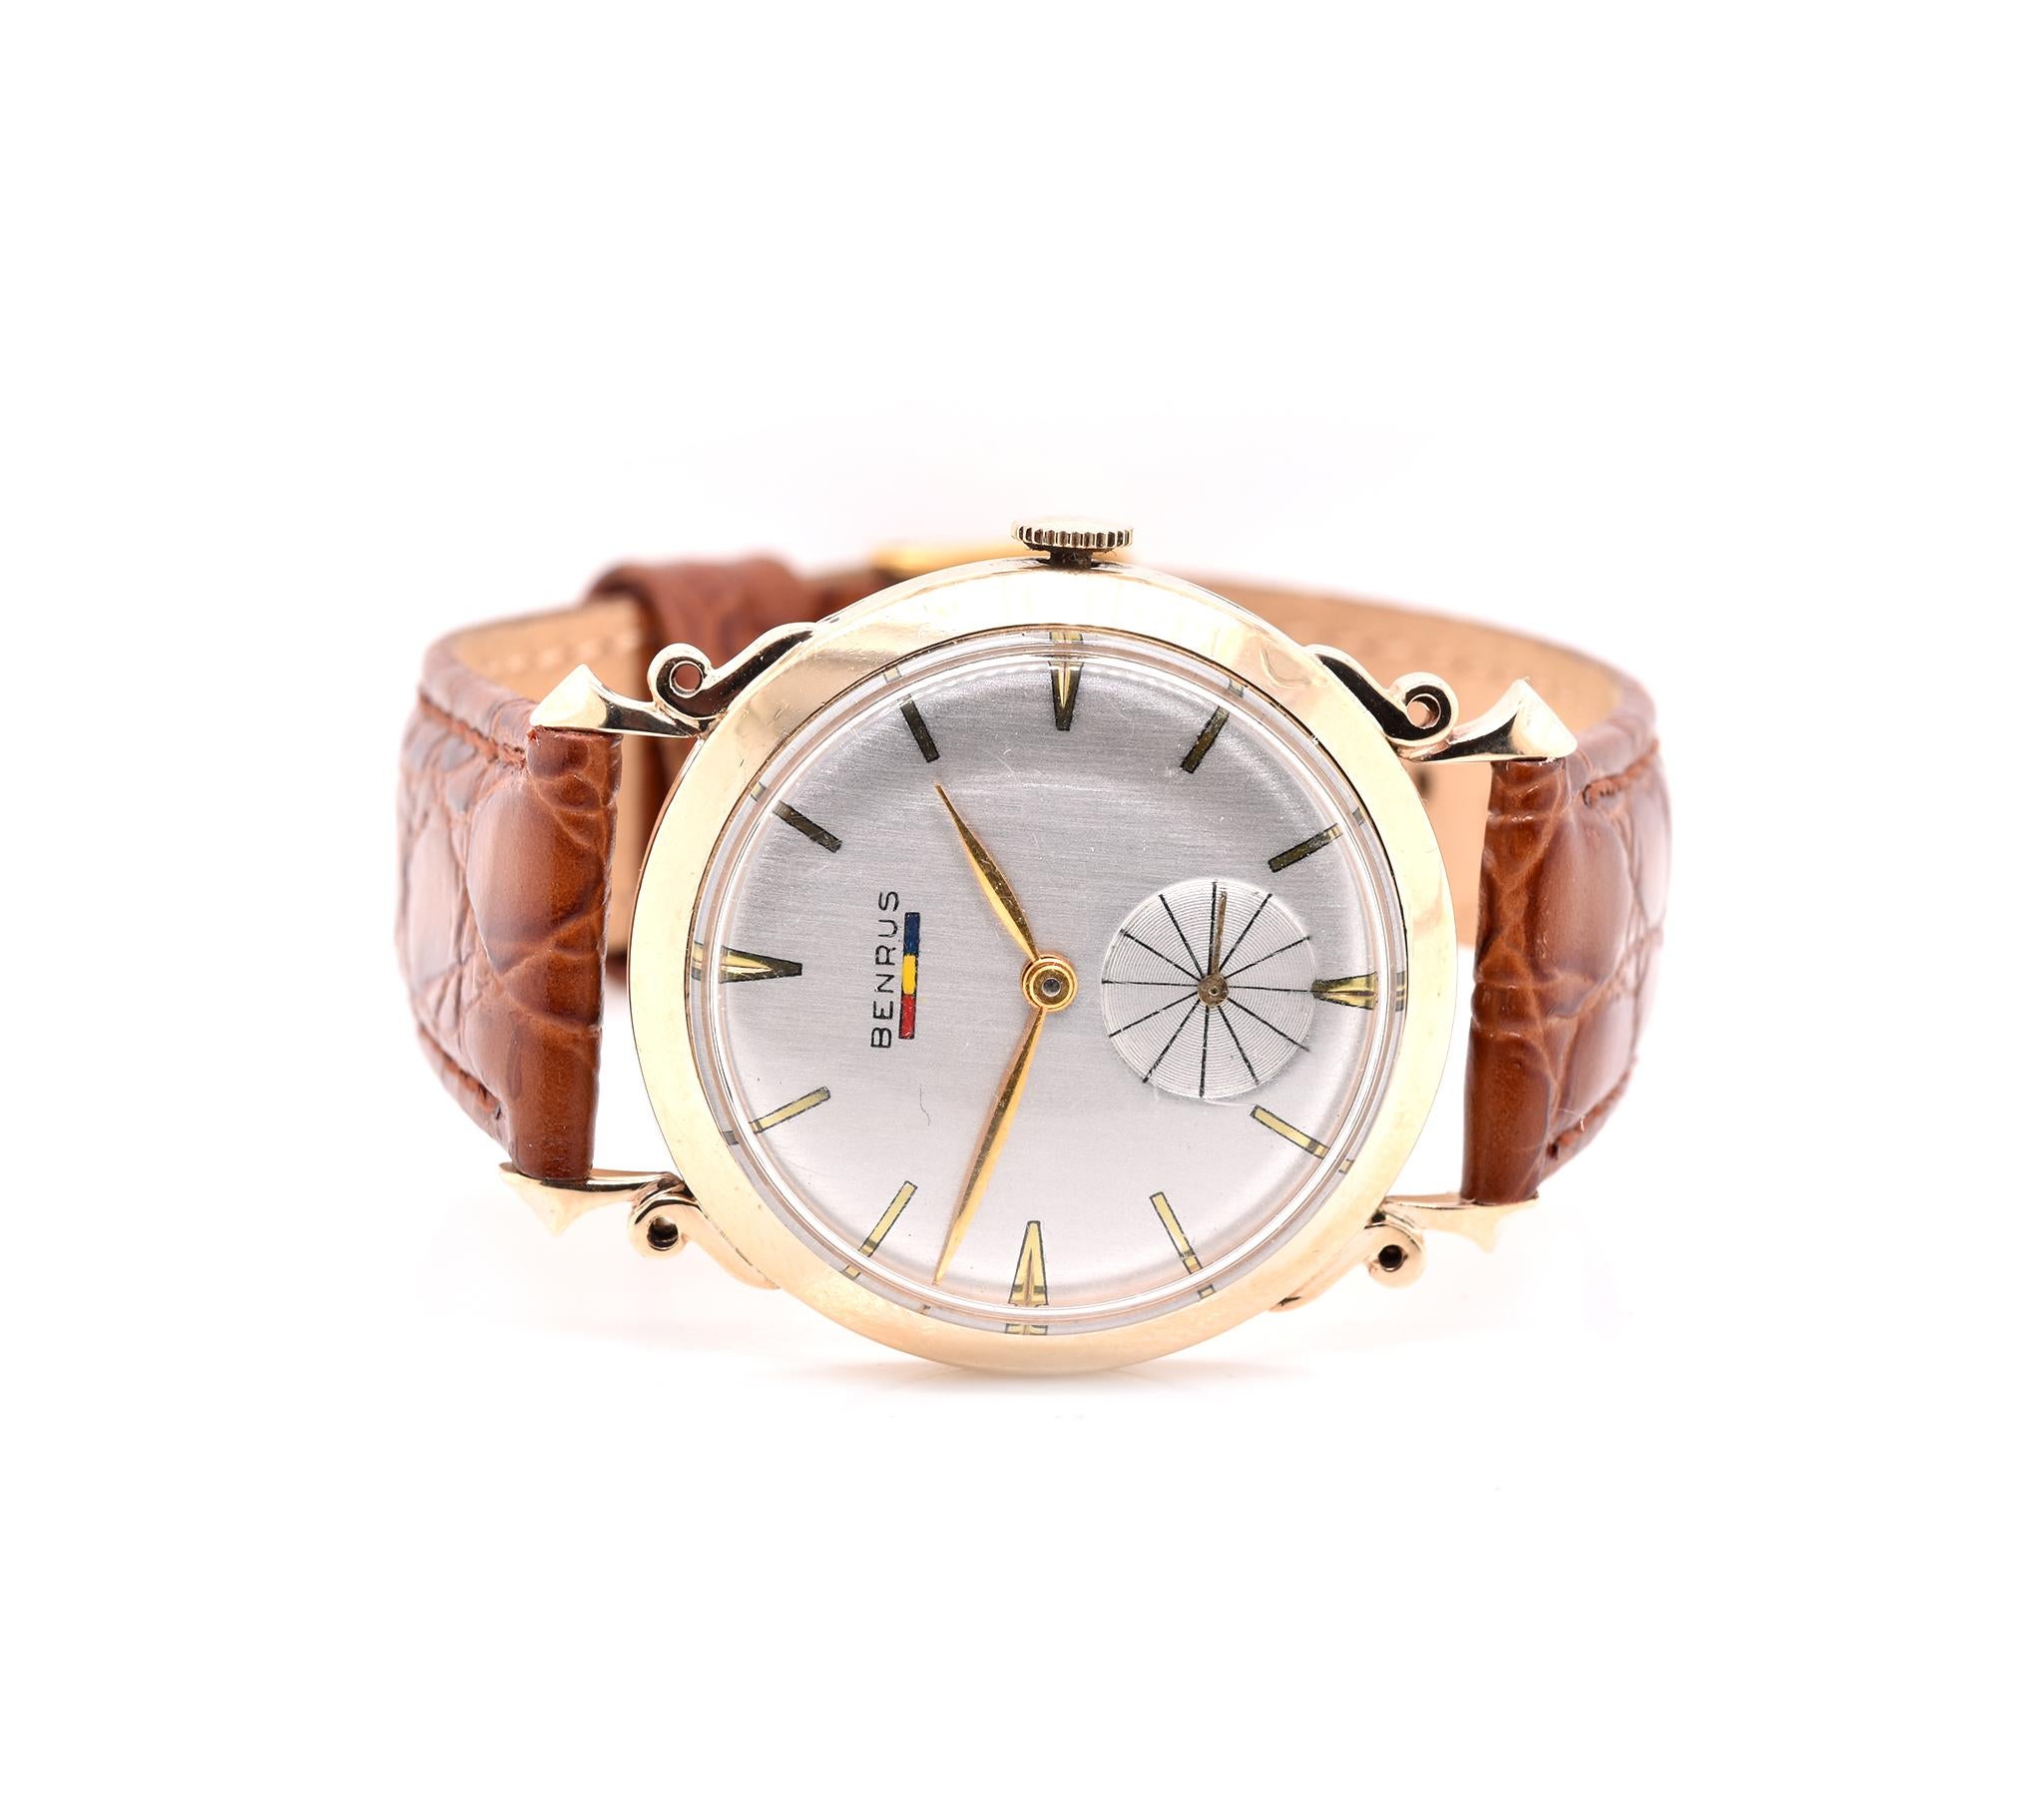 Movement: manual
Function: hours, minuets, seconds, date
Case: 32mm 14K yellow gold round casse
Bracelet: brown leather strap with buckle 
Dial: silver stick dial
Reference #: vintage mens
Case Serial # 61124XXX
17 Jewels

No box and